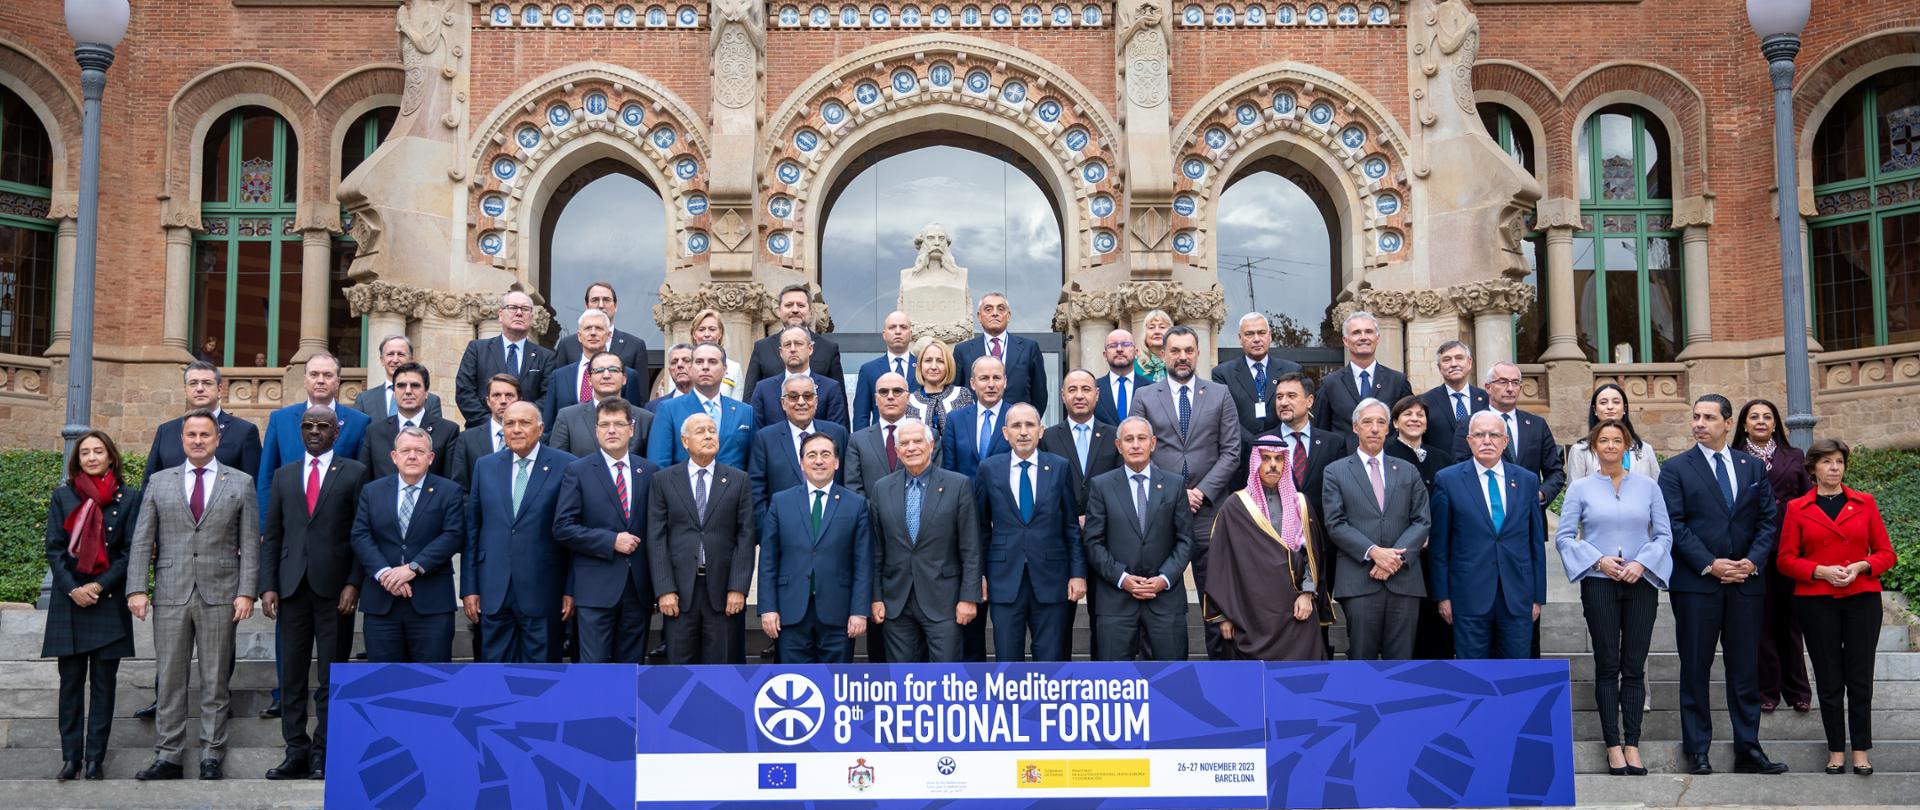 Regional Forum of the Union for the Mediterranean in Barcelona